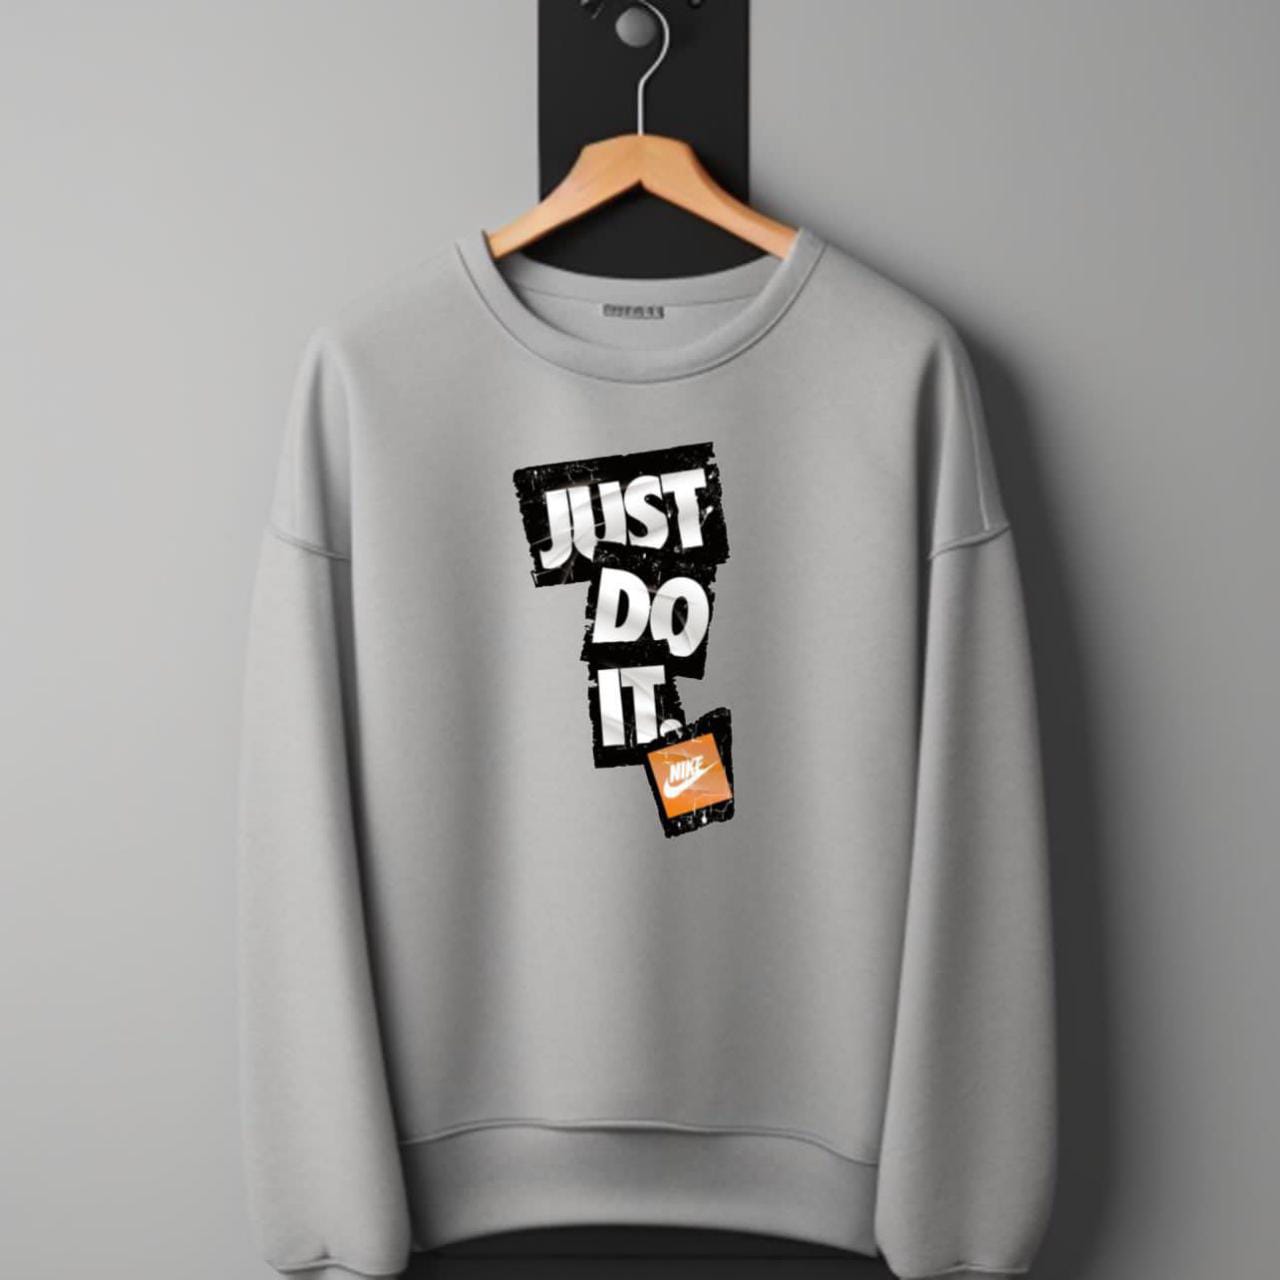 Details View - SWEATSHIRT photos - reseller,reseller marketplace,advetising your products,reseller bazzar,resellerbazzar.in,india's classified site,JUST DO IT SWEATSHIRT , Buy SWEATSHIRT online, SWEATSHIRT in surat,SWEATSHIRT in Gujarat